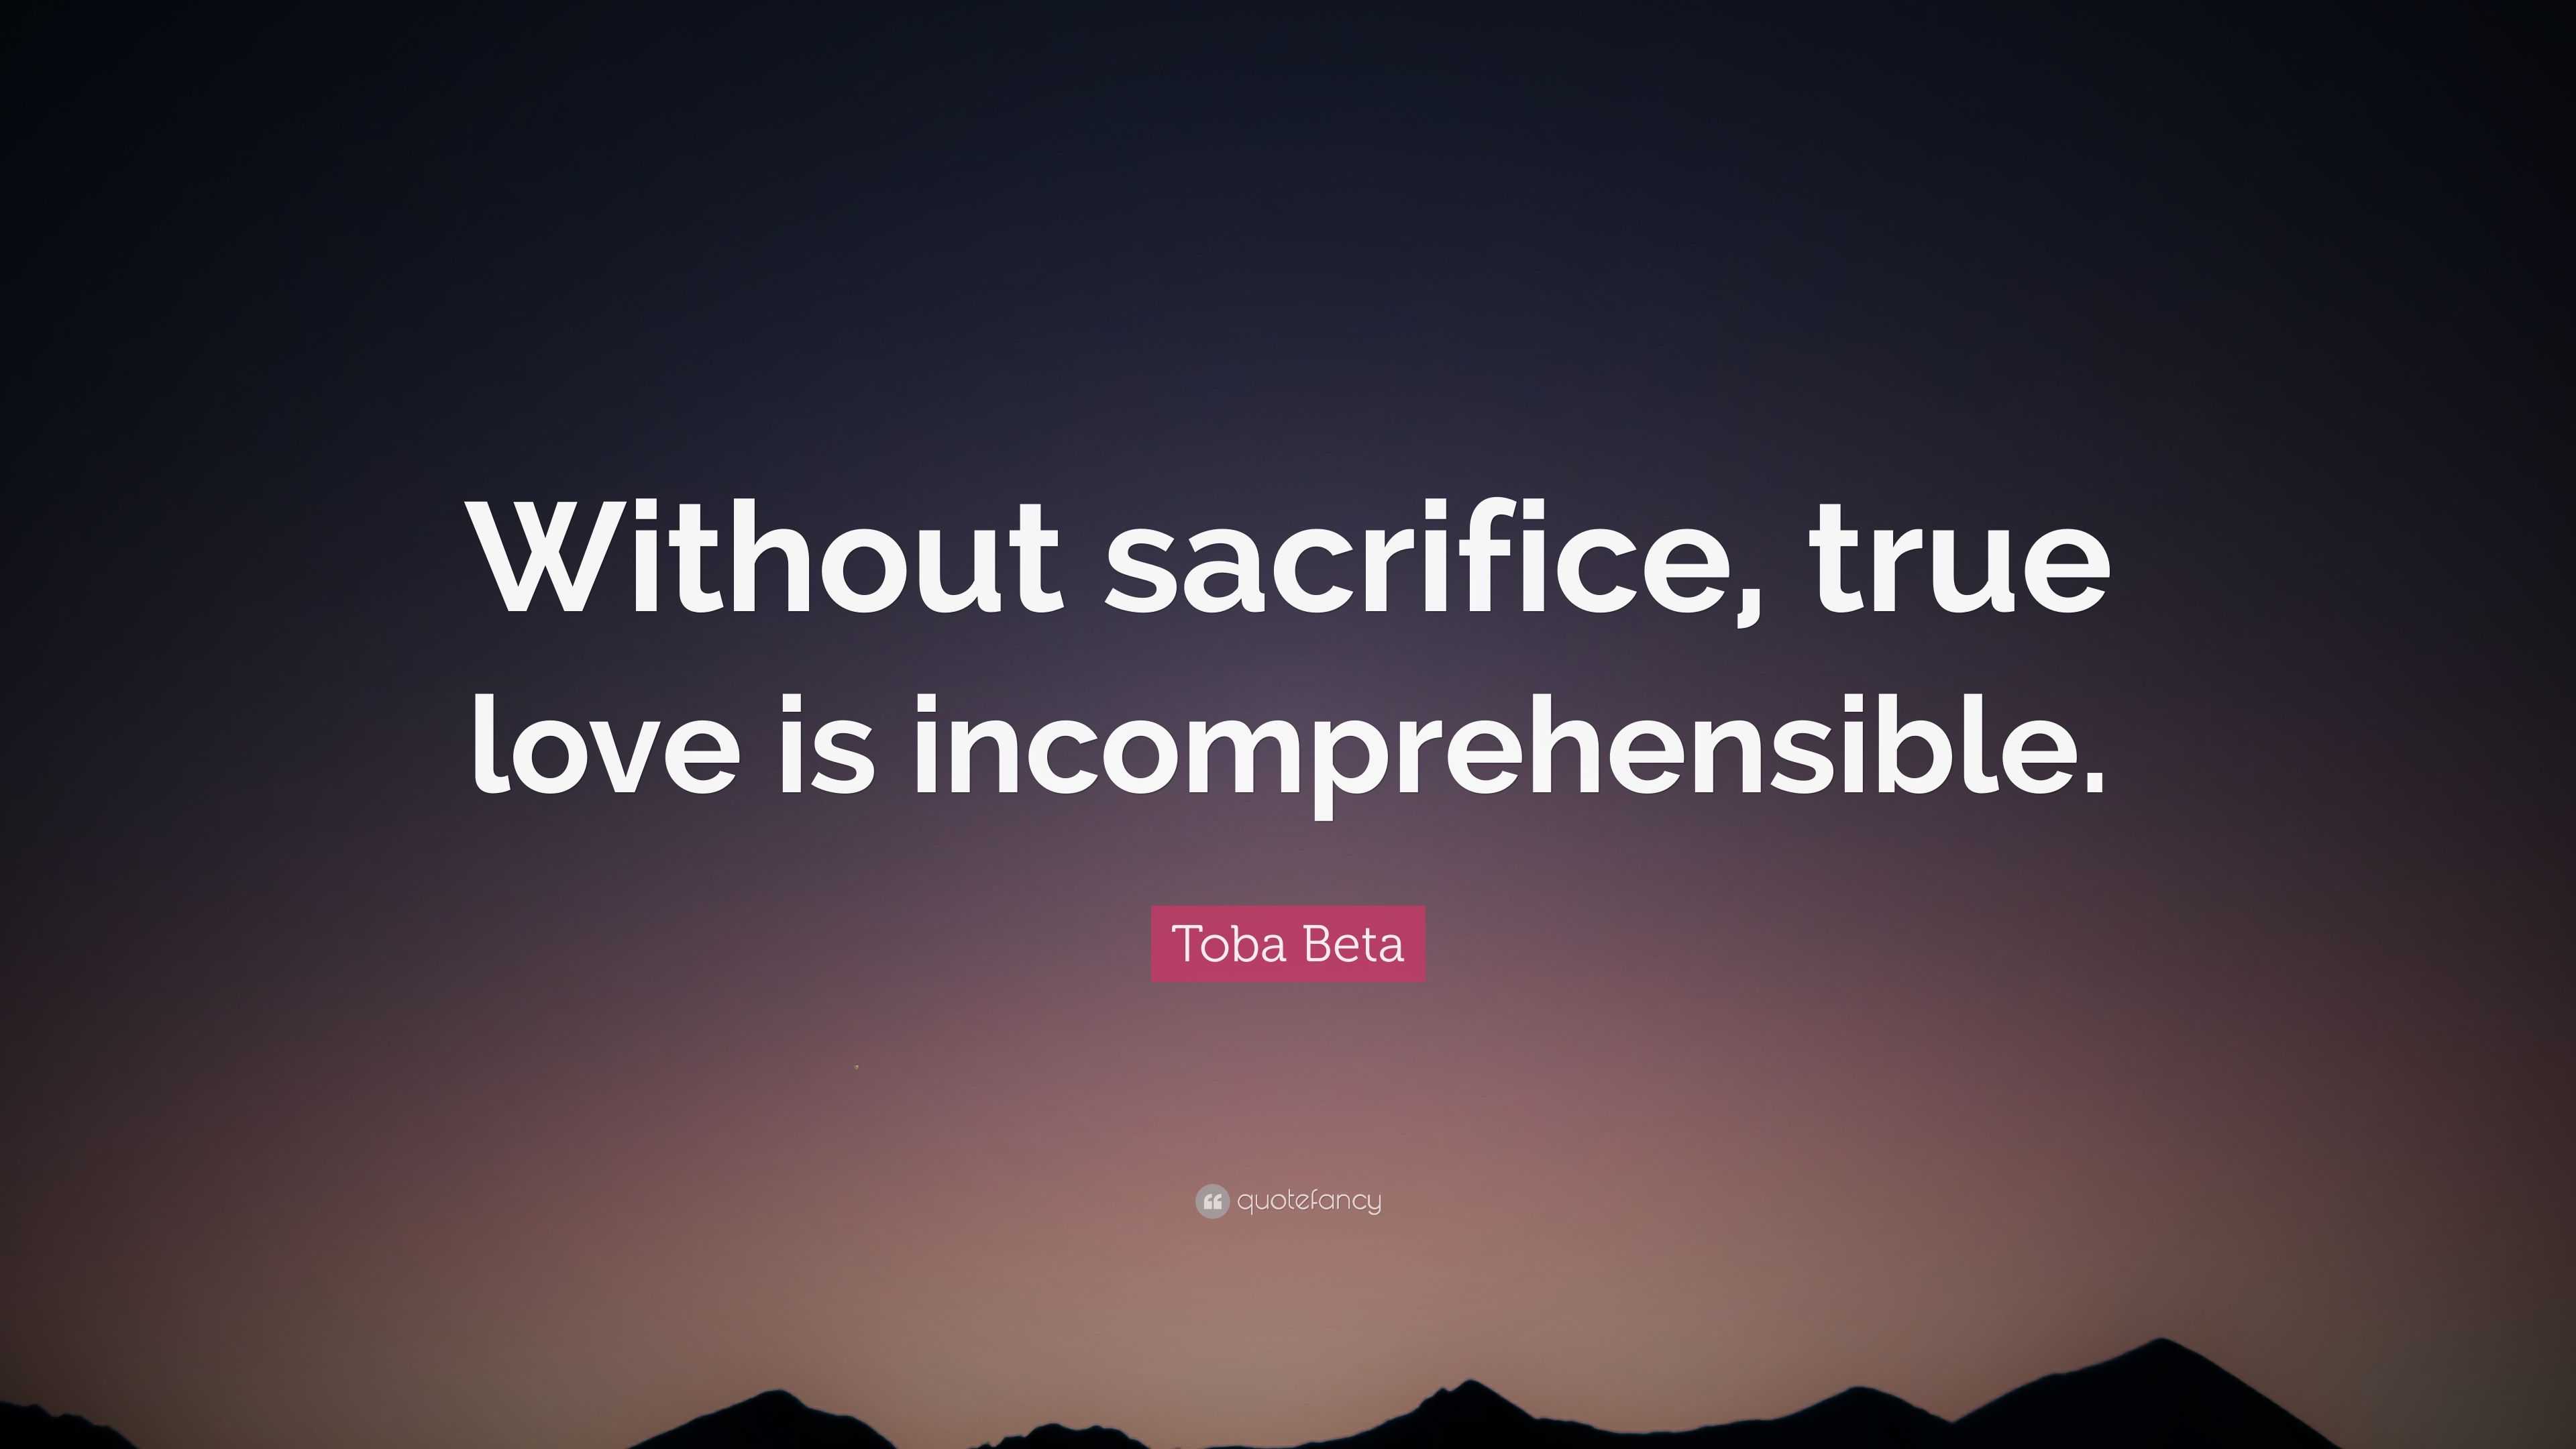 Toba Beta Quote “Without sacrifice true love is in prehensible ”